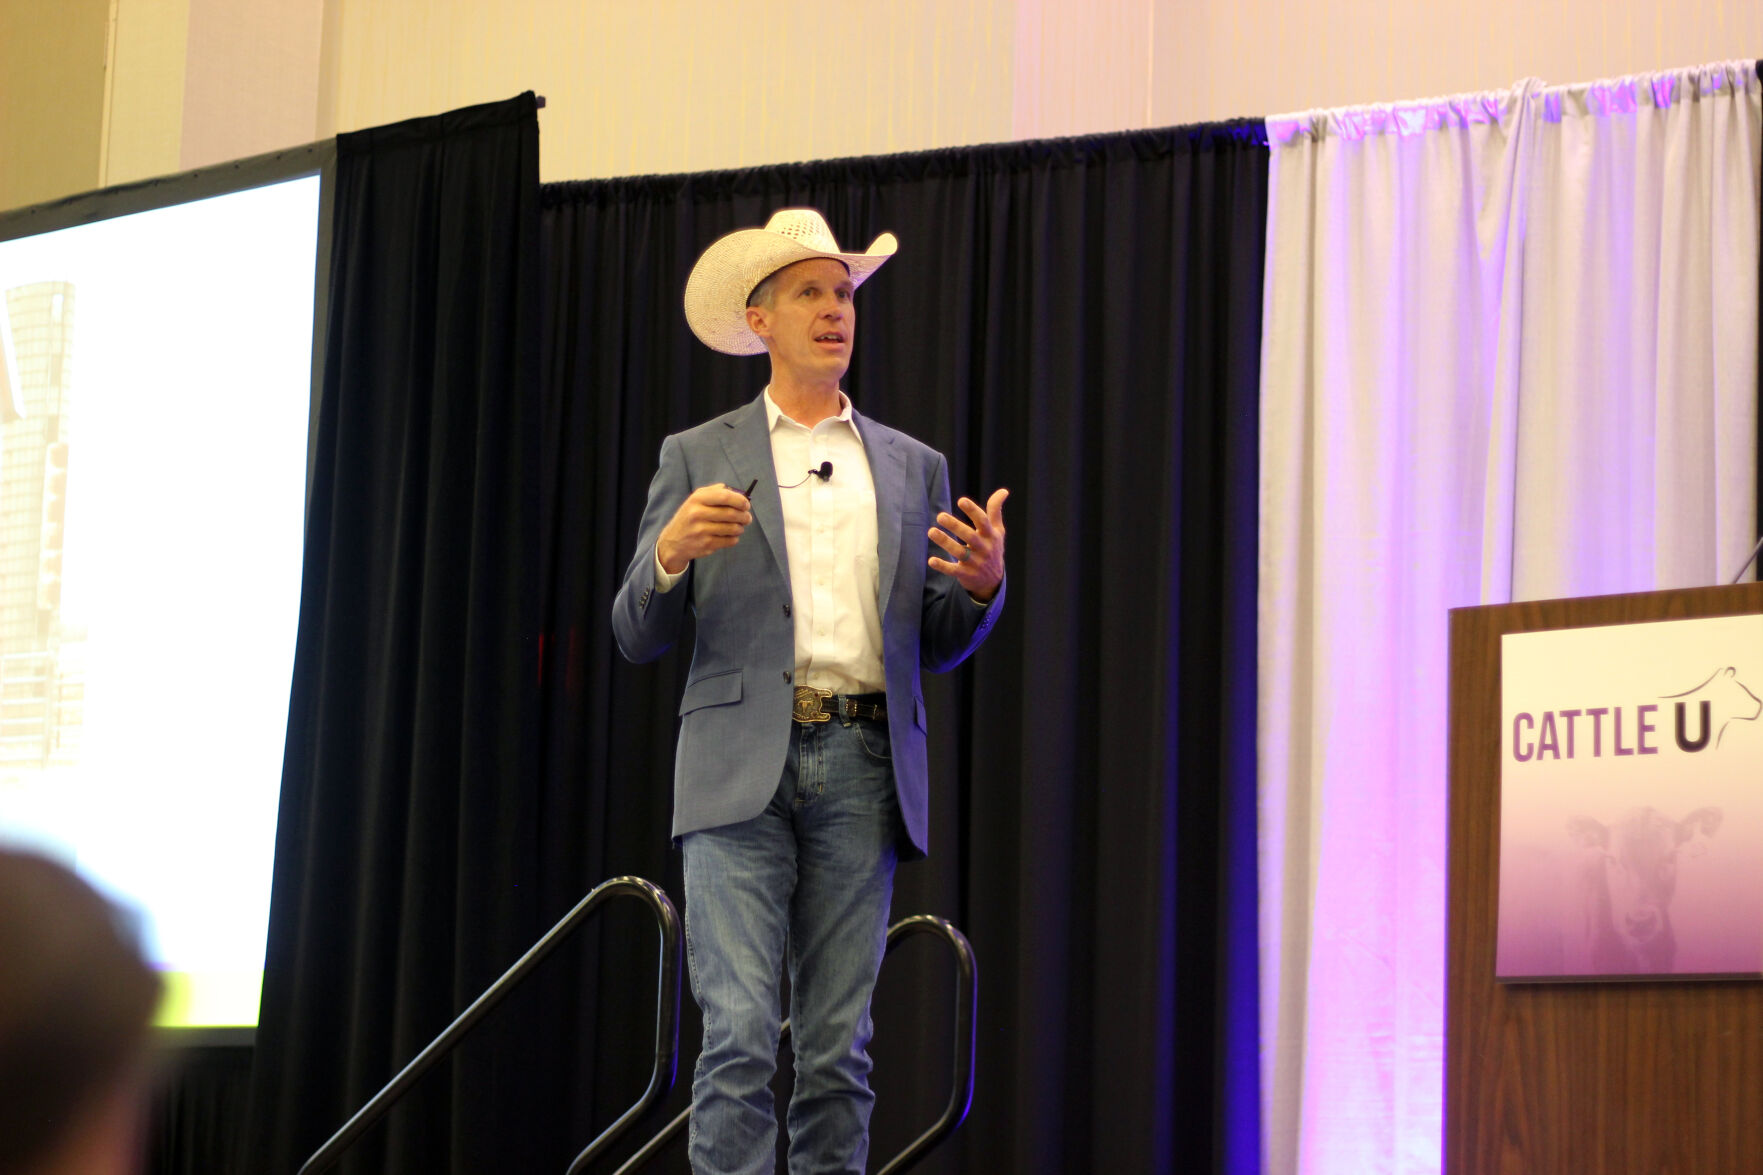 Matt Perrier delivers the keynote address during lunch at Cattle U. (Journal photo by Lacey Vilhauer.)